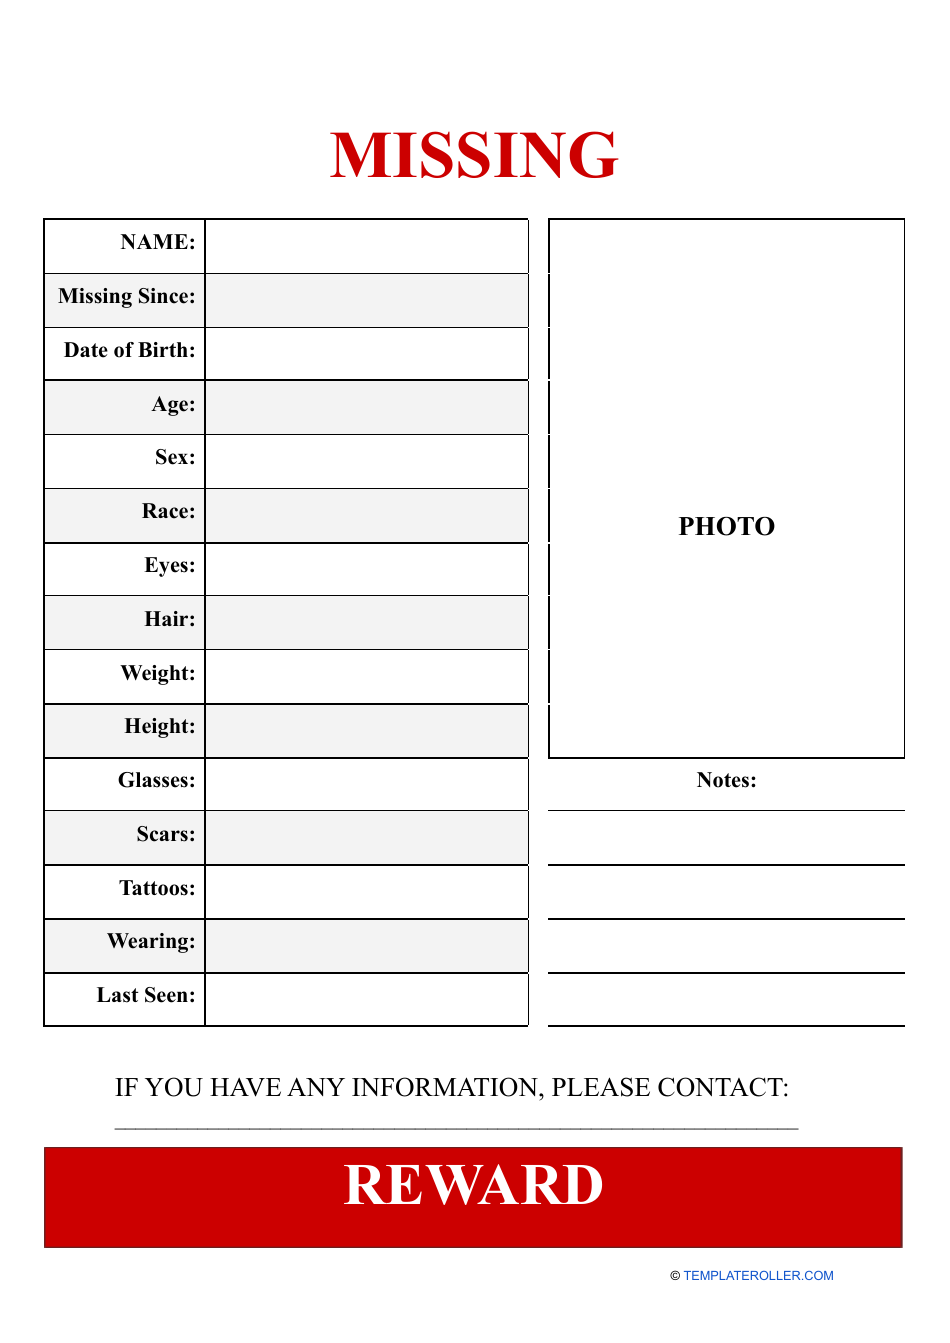 Missing Person Poster Template With Reward, Page 1